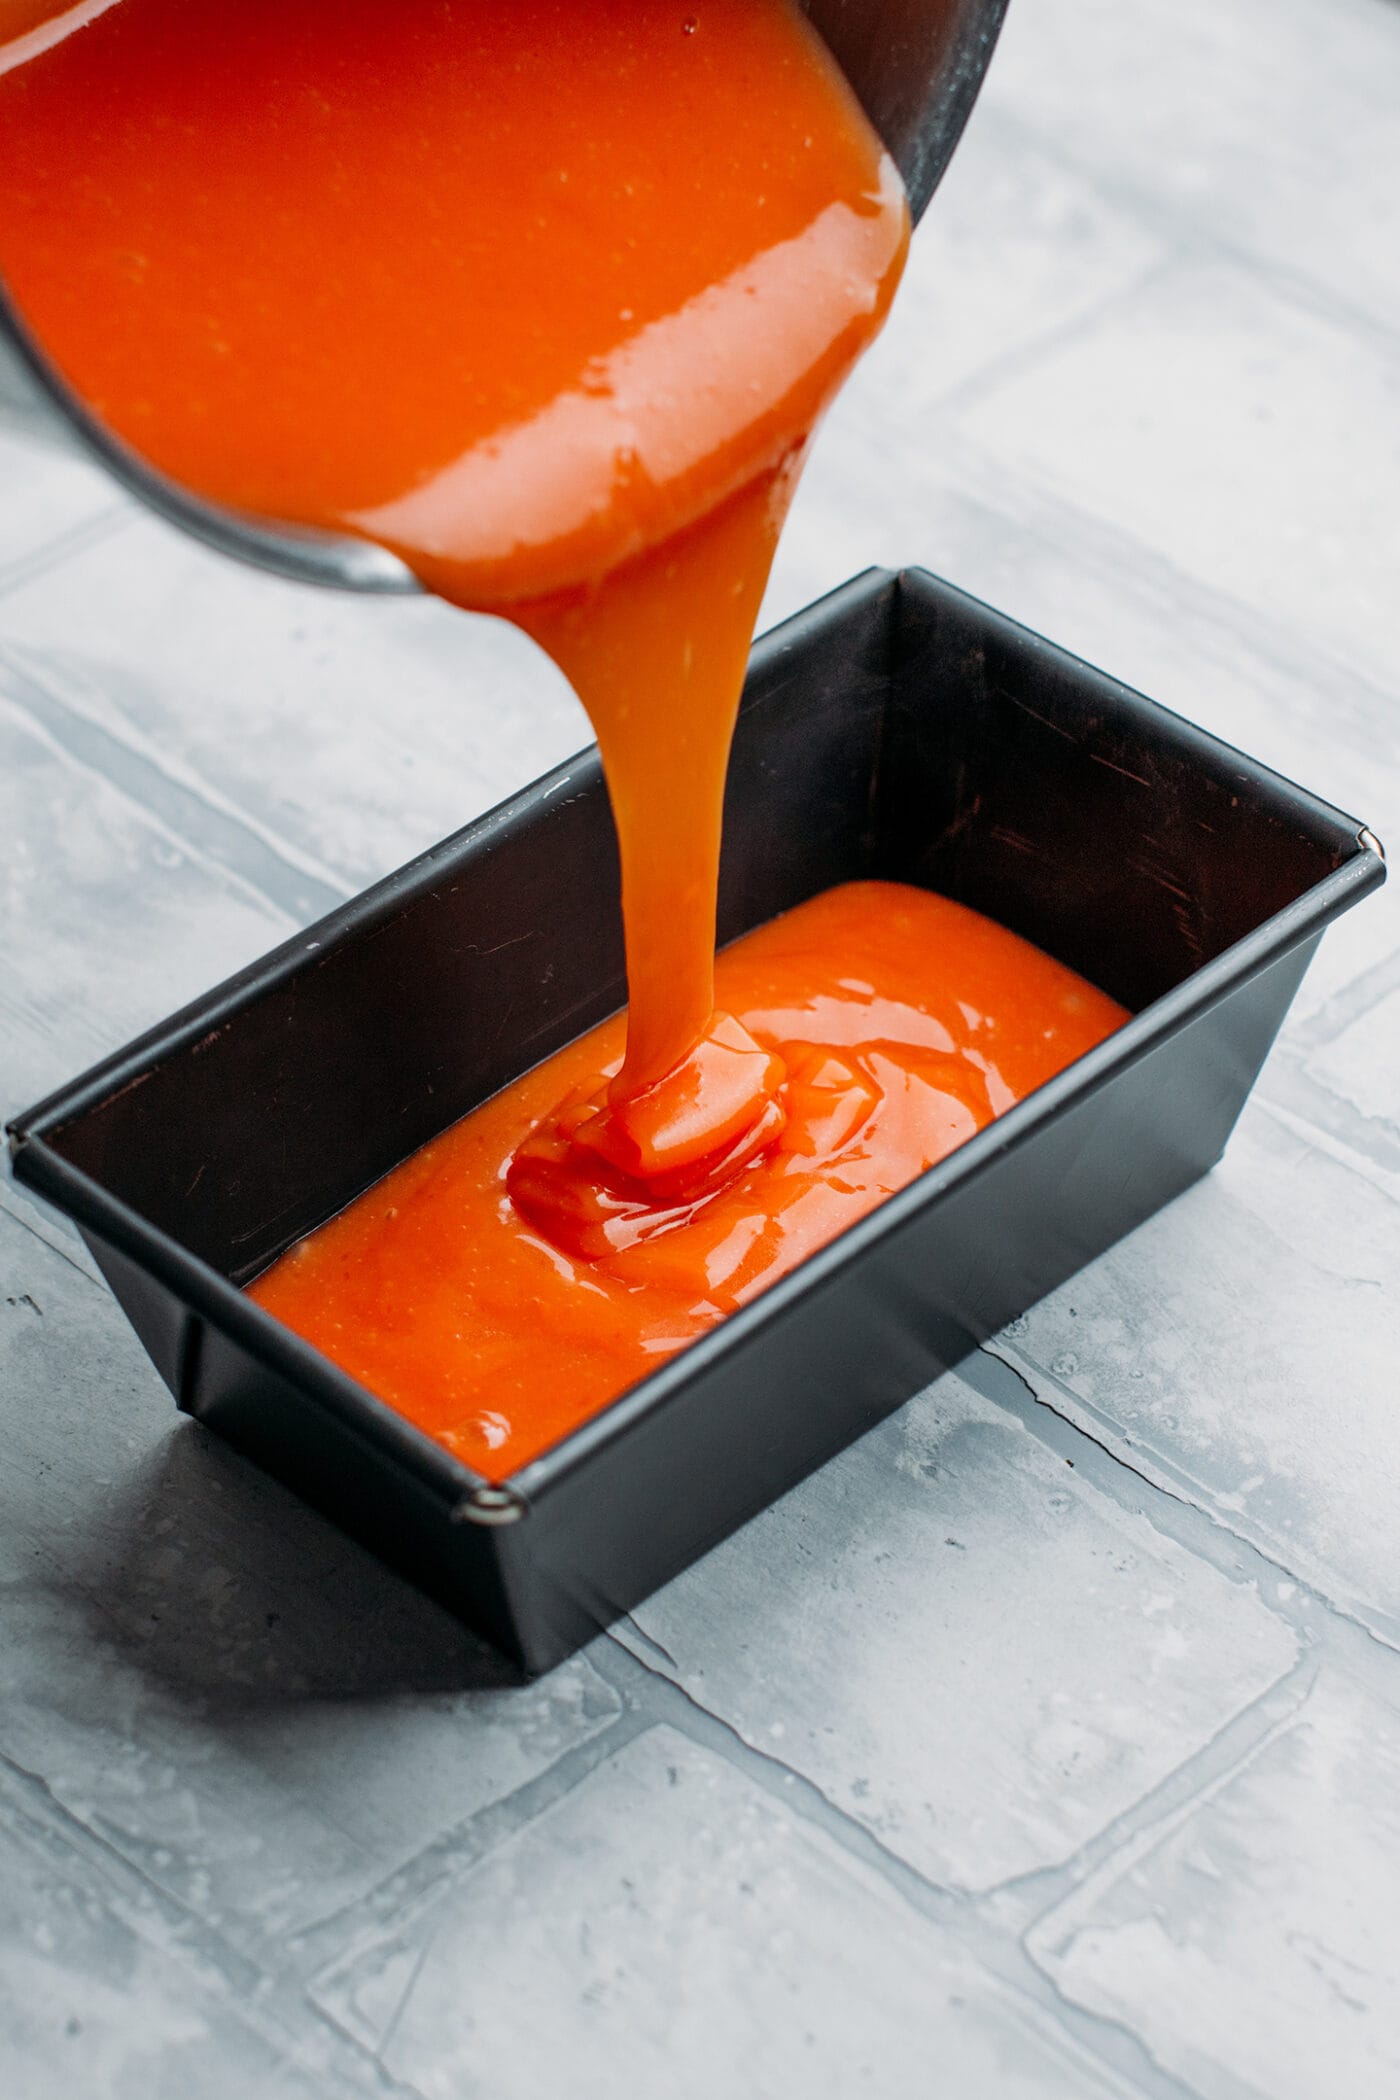 Pouring orange jelly into a pan.